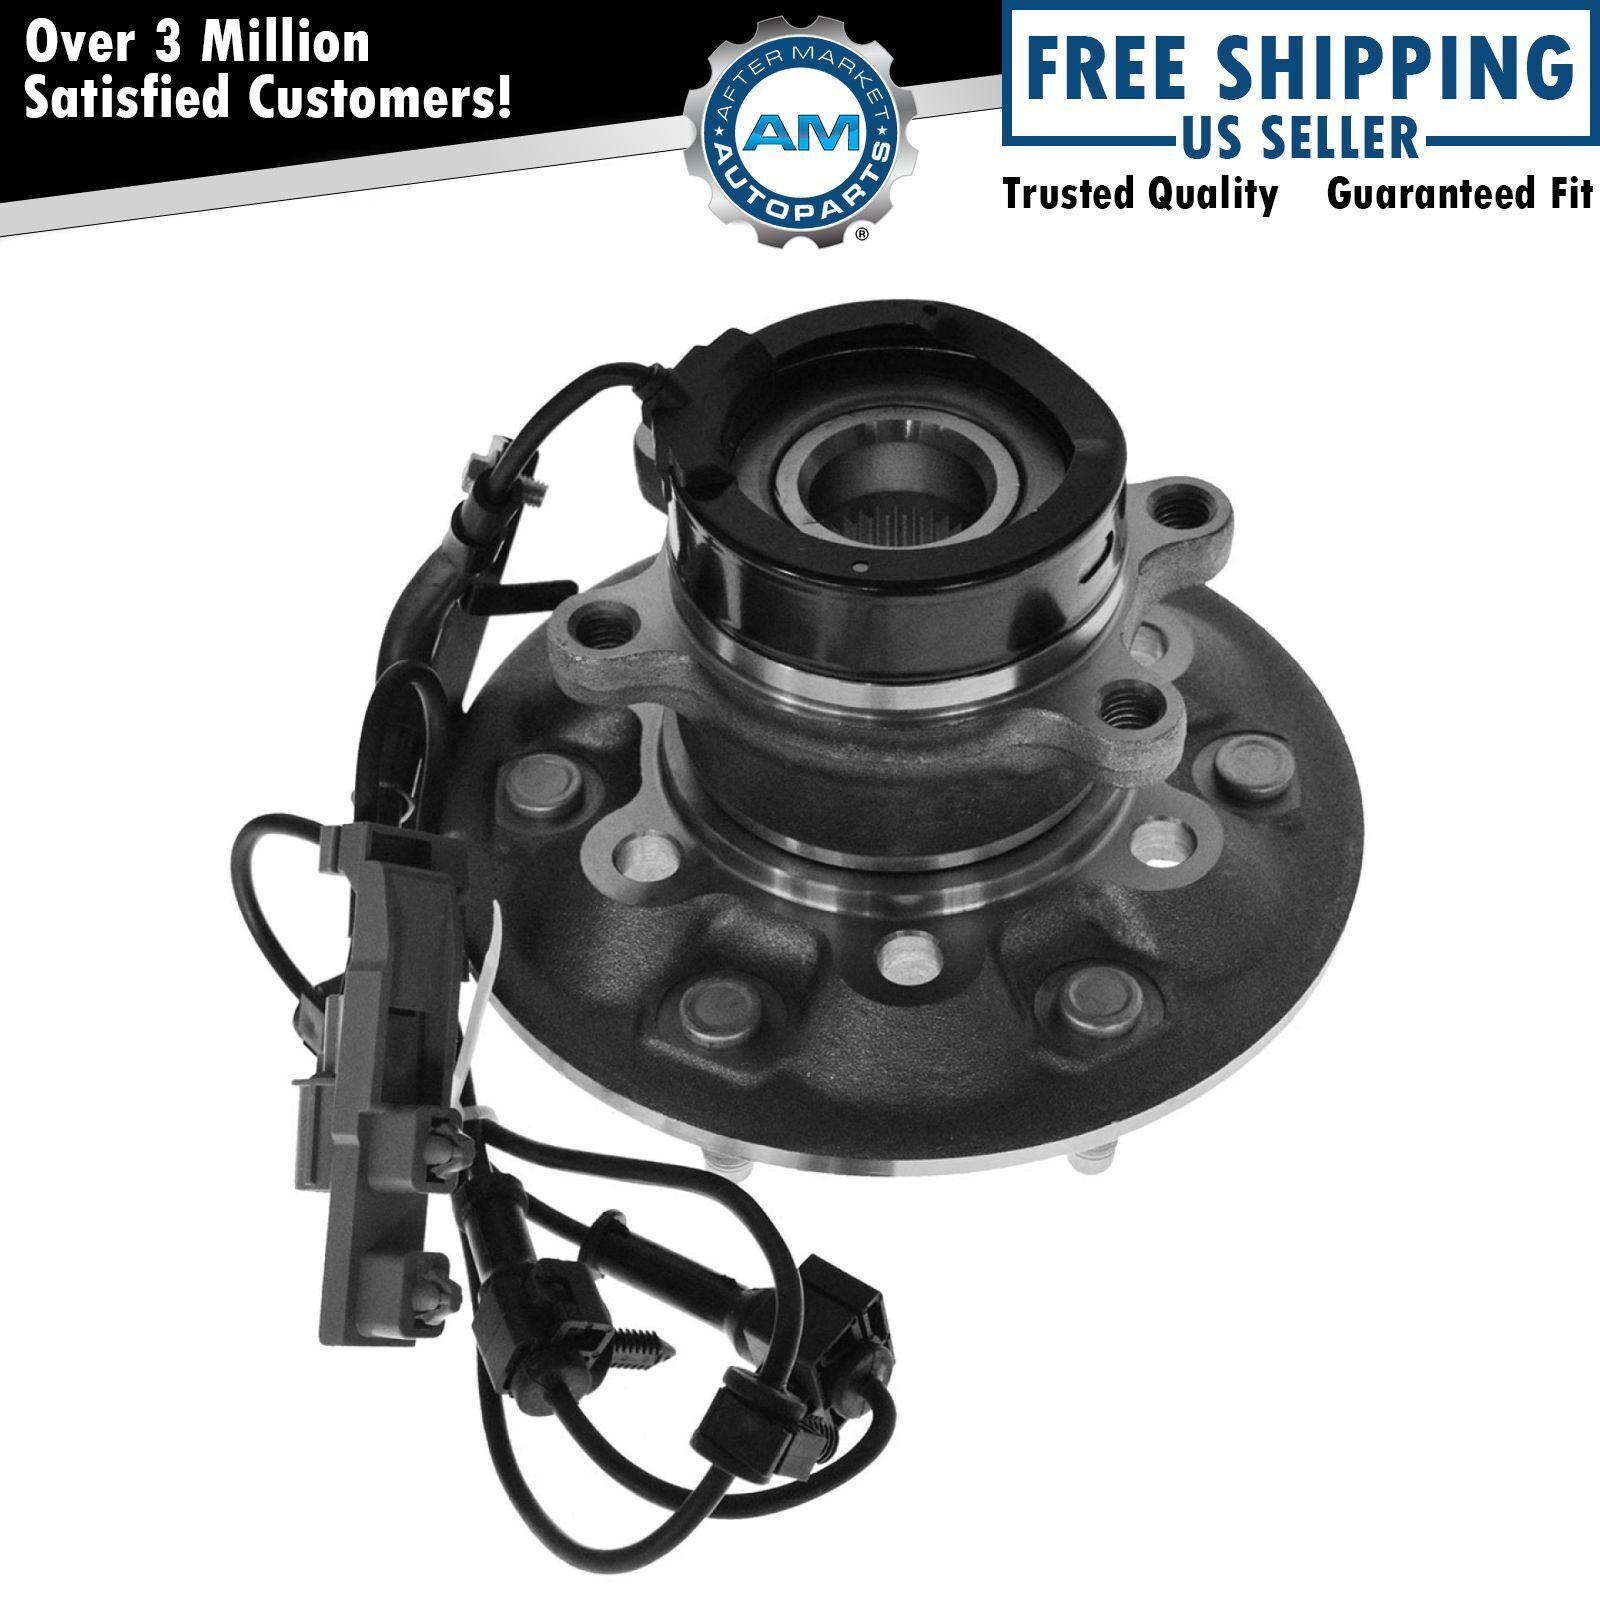 Front Wheel Hub & Bearing Driver Side 4x4 4WD w/ ABS for Colorado Canyon